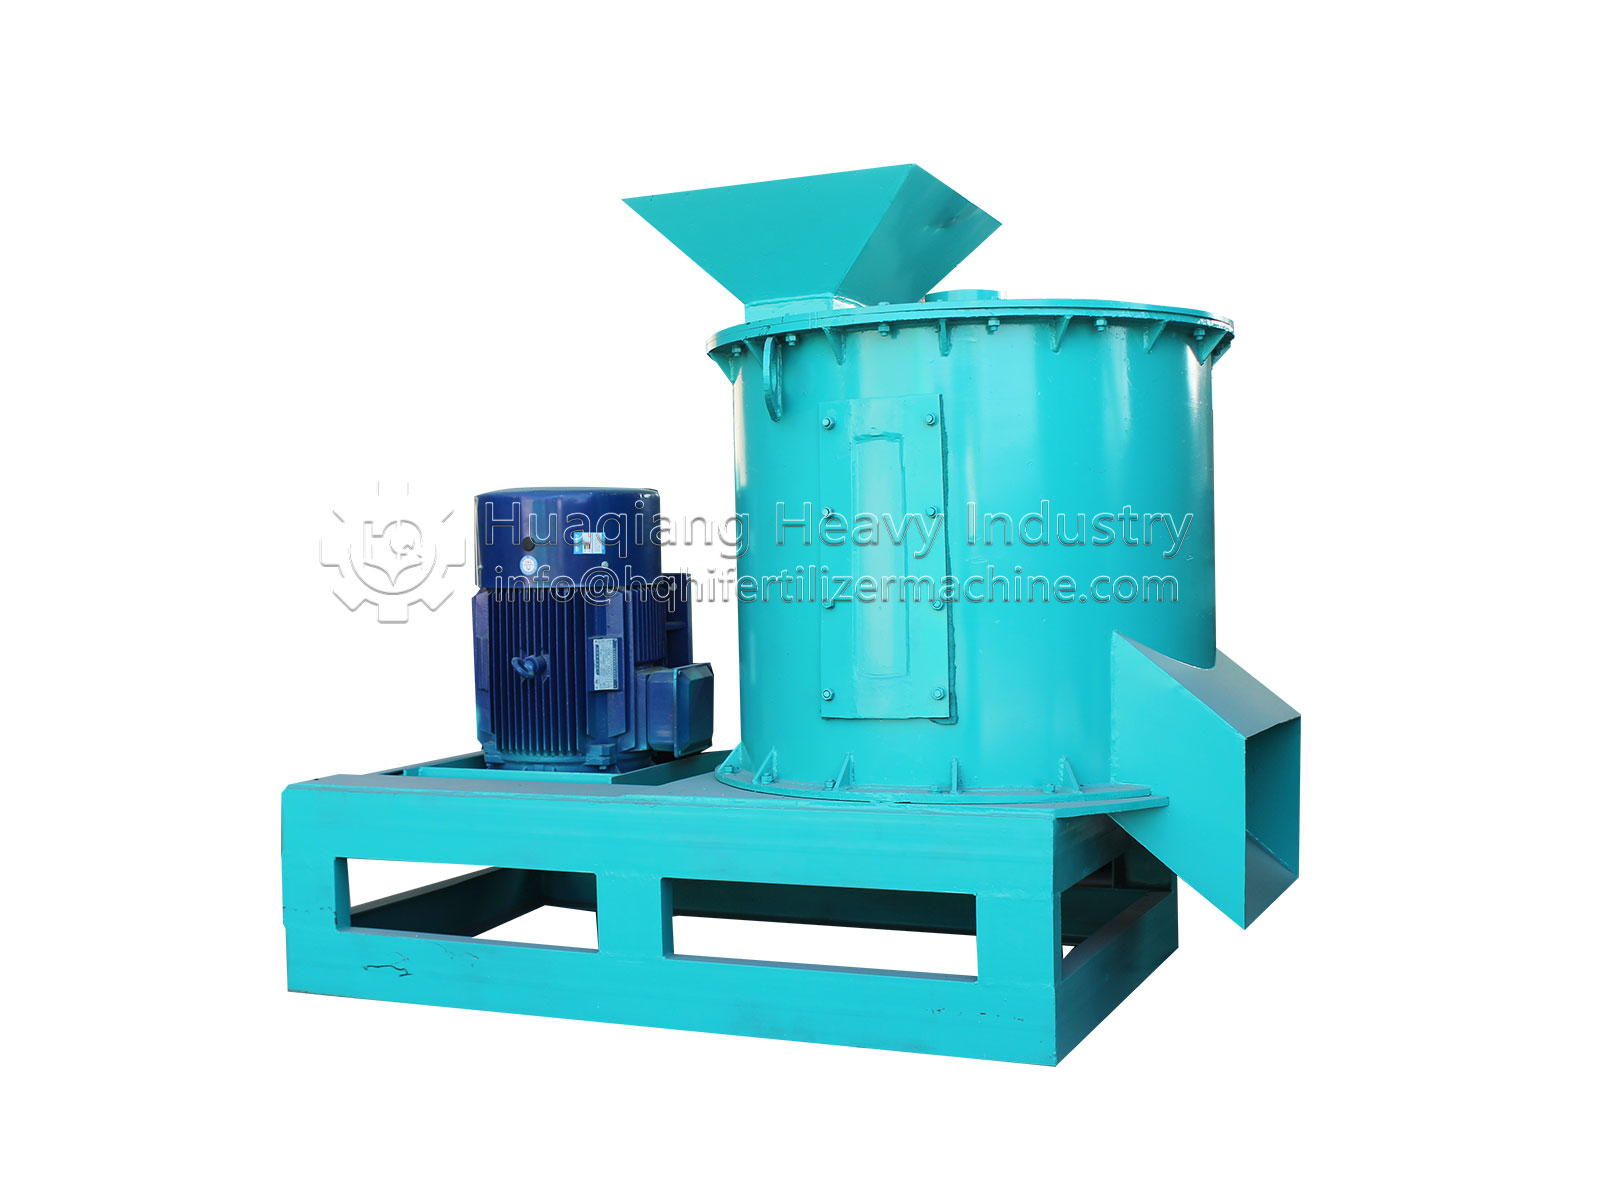 Organic fertilizer equipment is specialized in processing kitchen waste and producing organic fertilizer